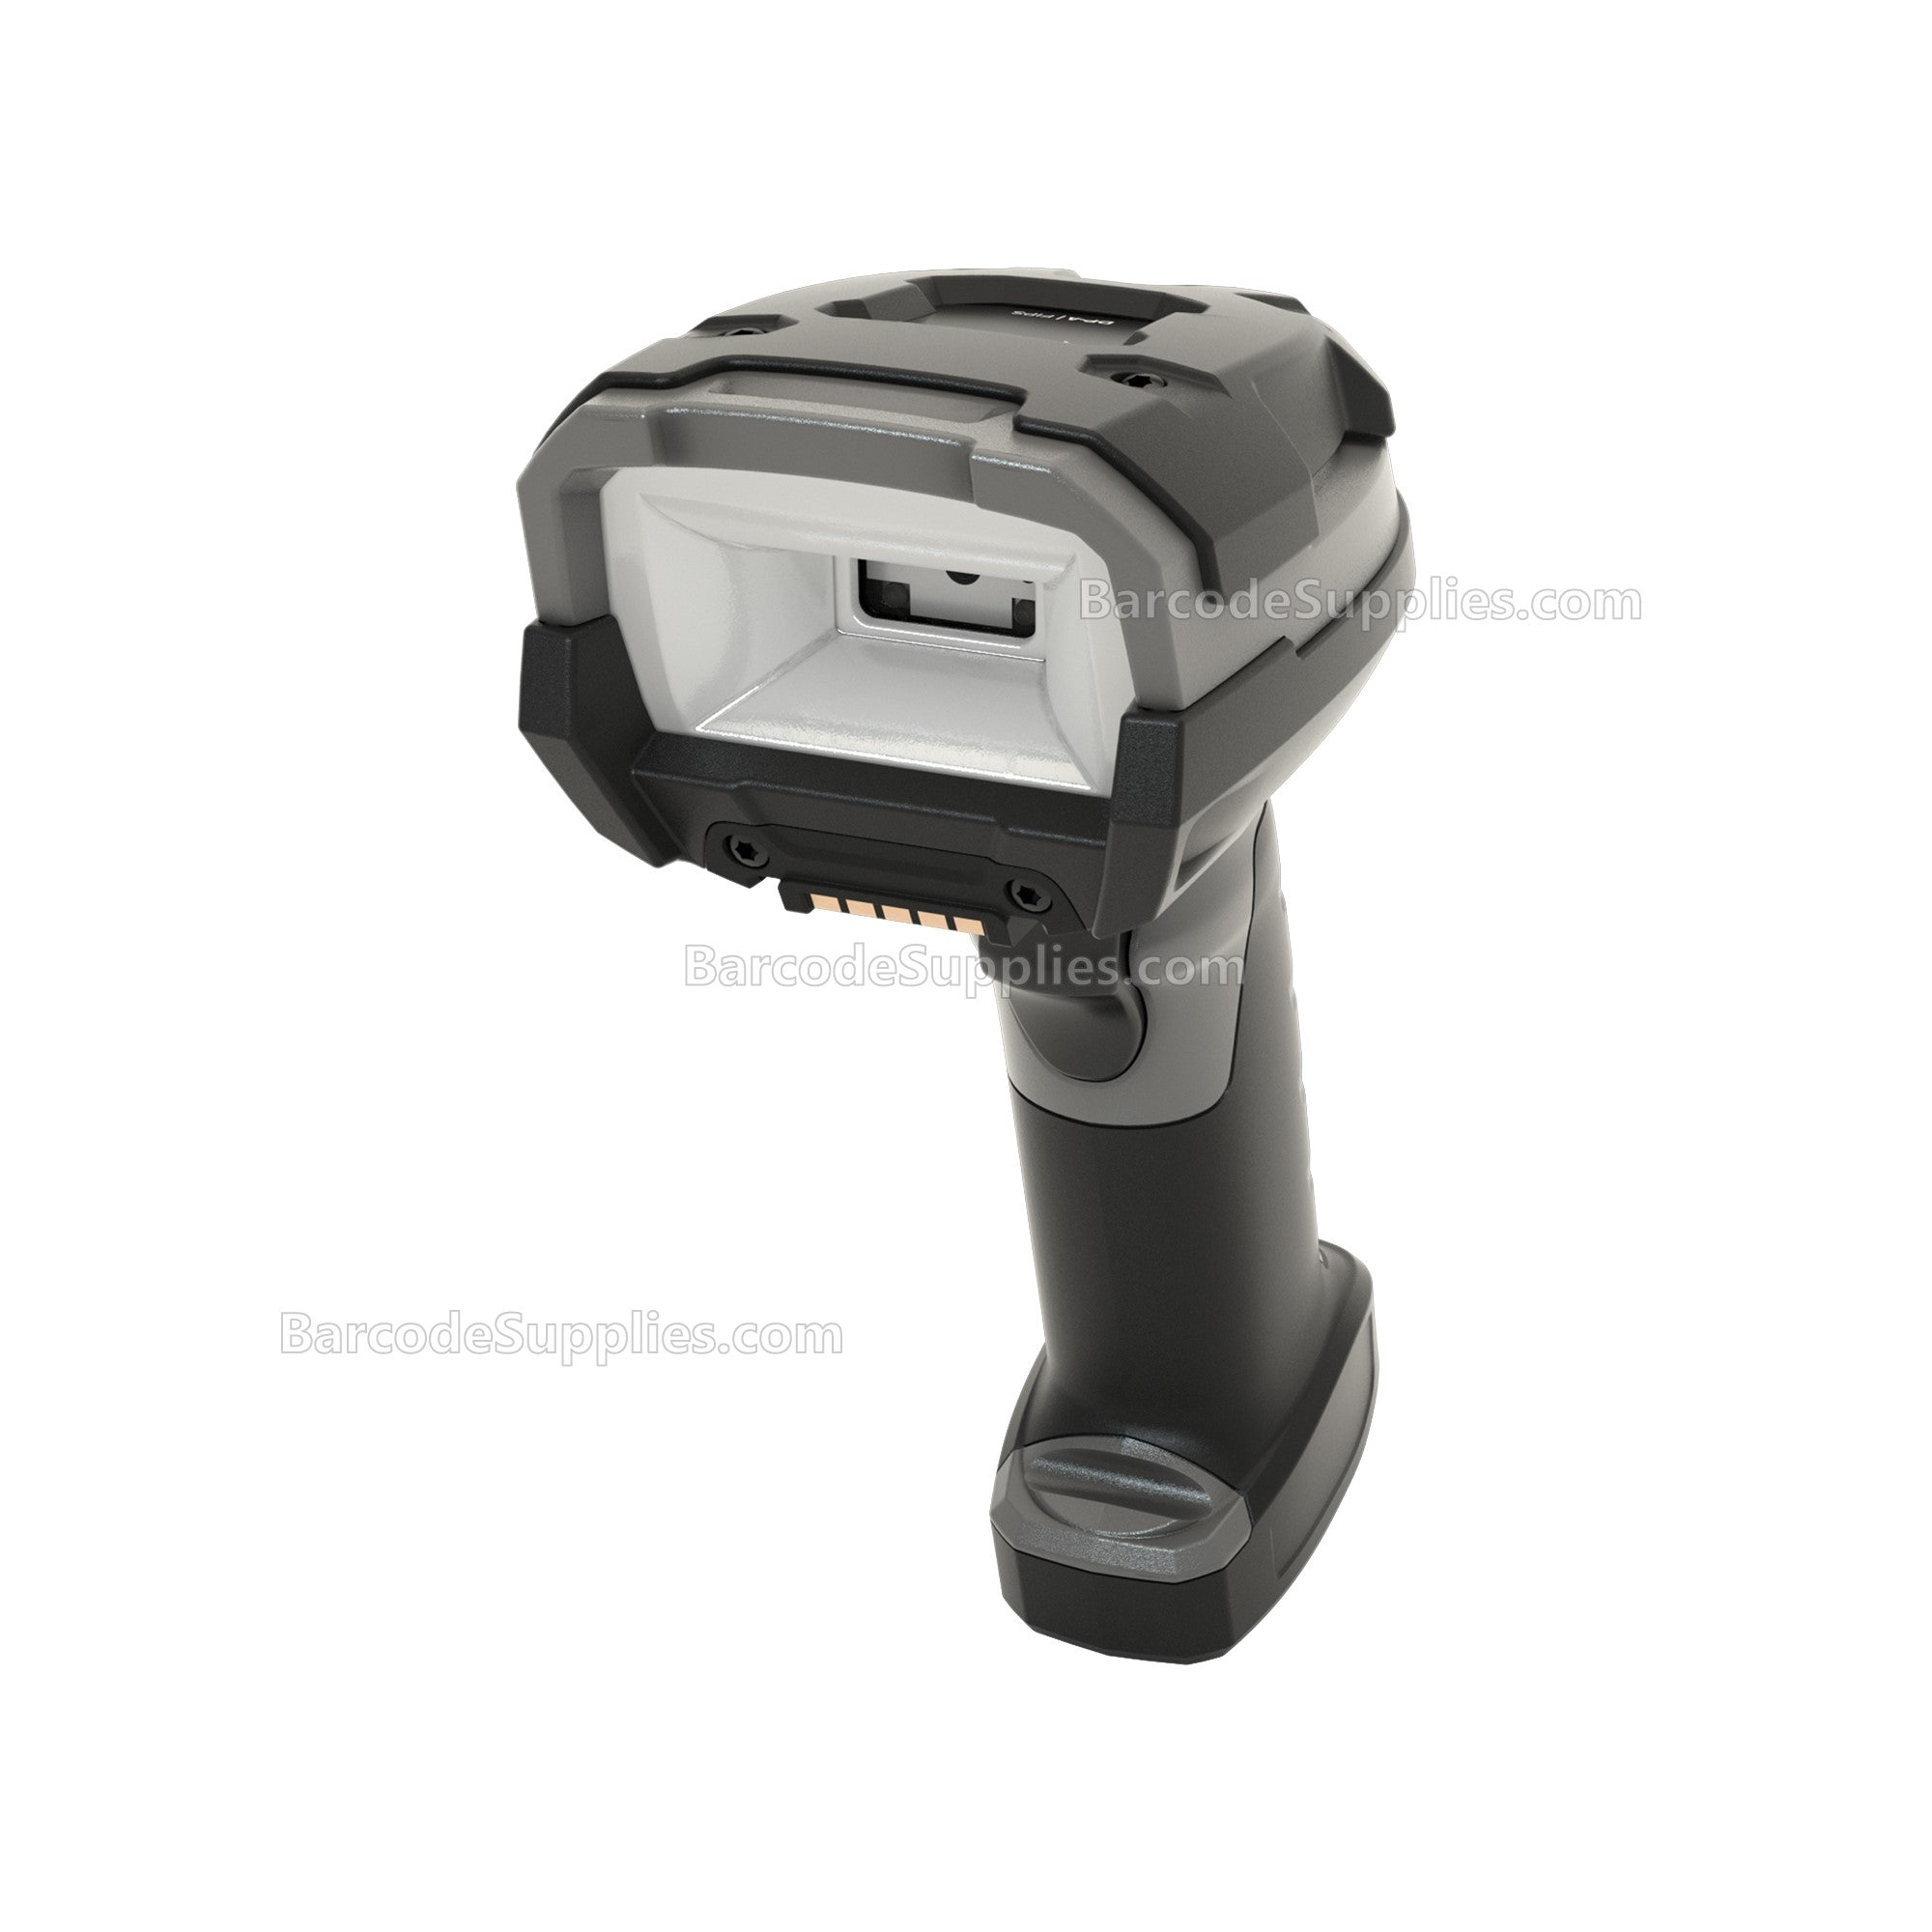 Zebra DS3678-DPA (FOR AUTOMATION) CORDLESS SIEMENS INDUSTRIAL ETHERNET KIT: DS3678-DPAF002VZWW SCANNER, CBA-RF5-S07ZAR SERIAL CABLE, STB3678-C100F3WW CRADLE, EA3600-S1CP-00 ETHERNET ADAPTER (PROFINET, MODBUS TCP & TCP/IP PROTOCOLS)